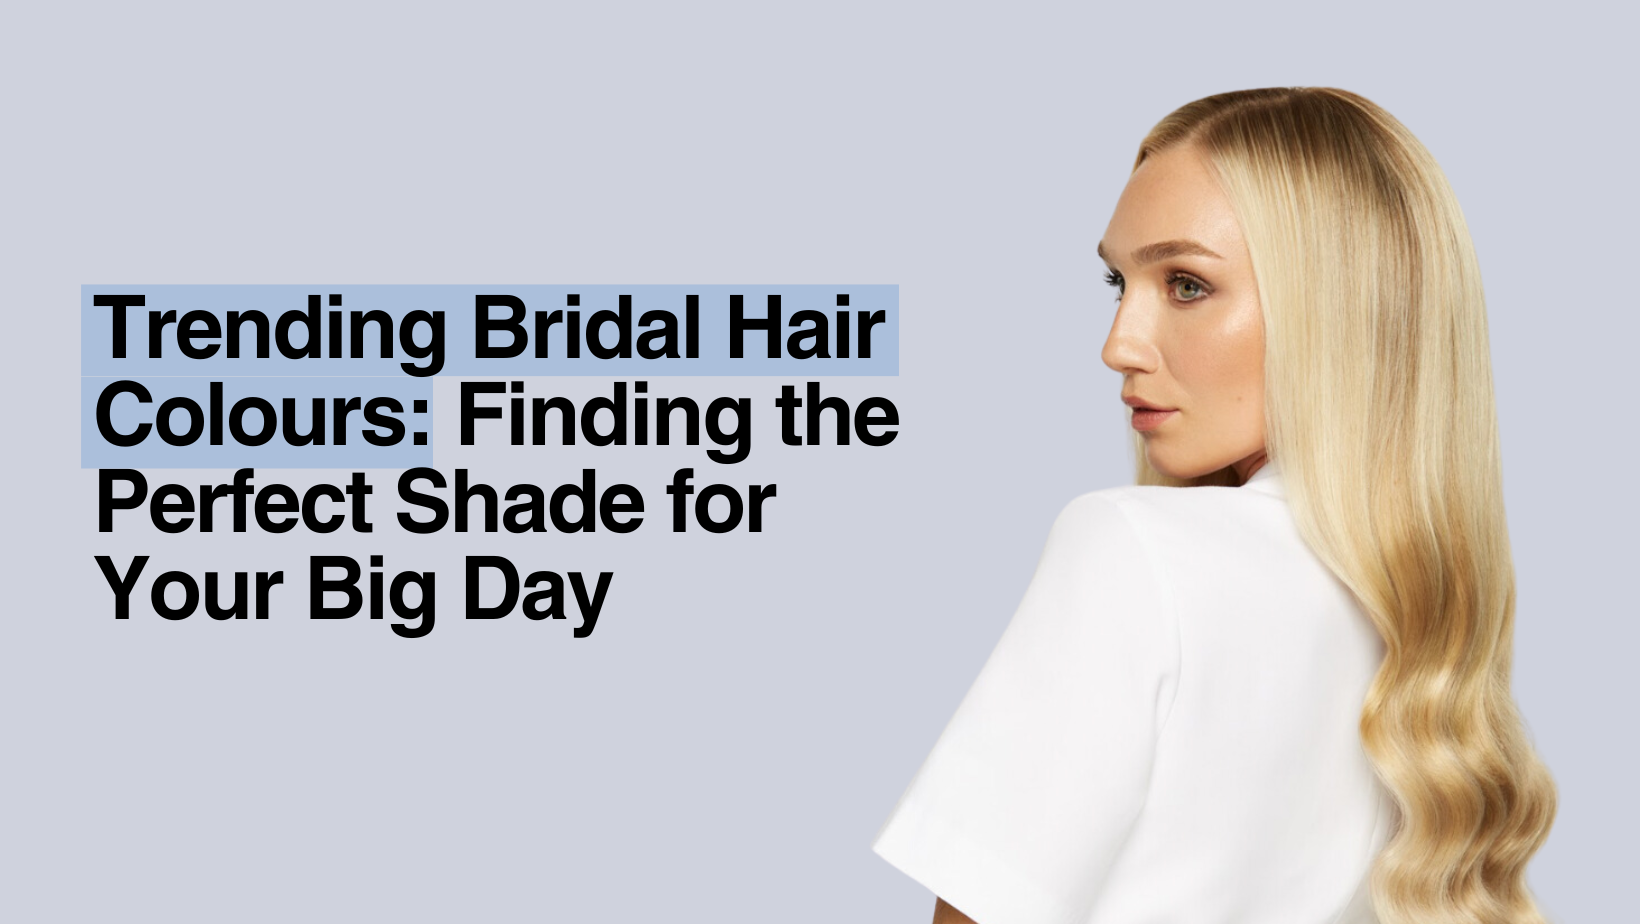 Trending Bridal Hair Colours: Finding the Perfect Shade for Your Big Day